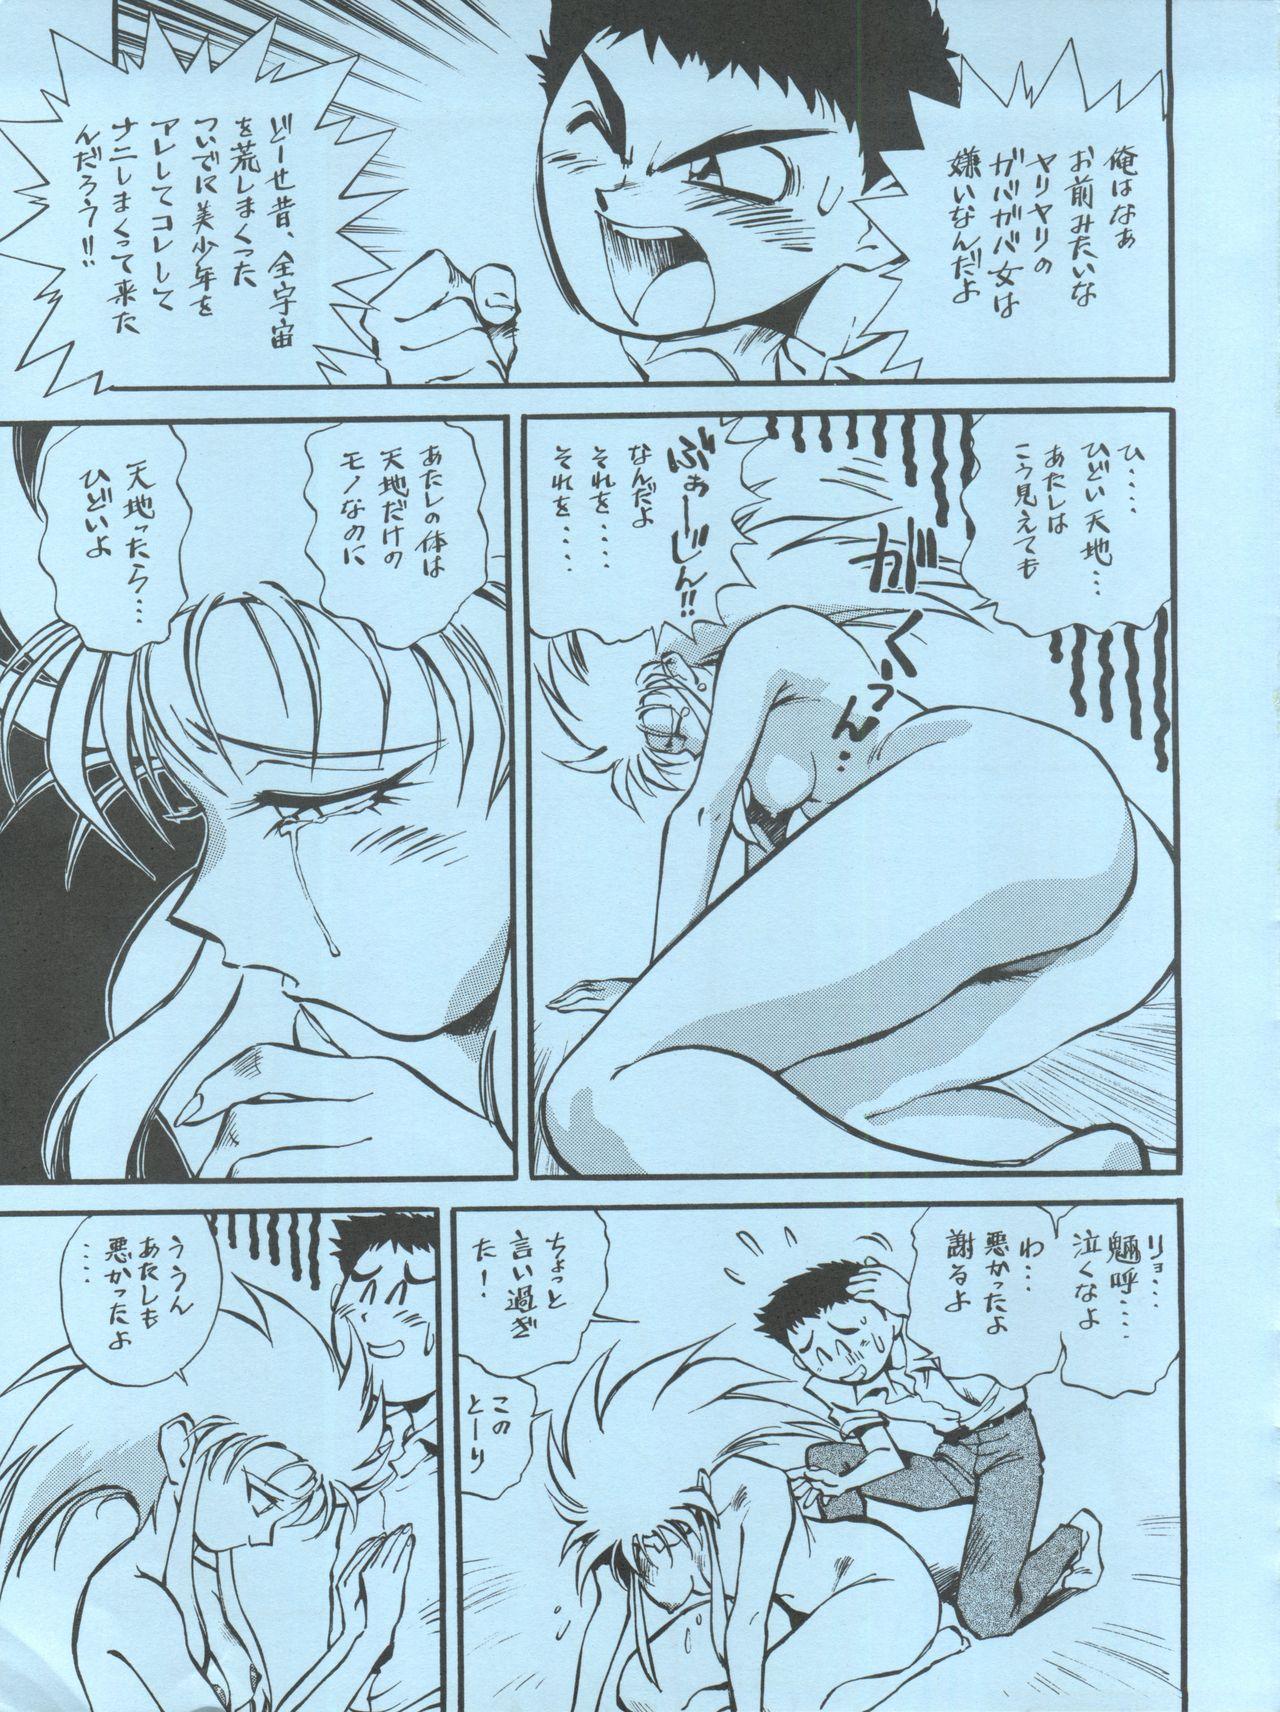 Penis LOOK OUT 27 - Sailor moon Street fighter Tenchi muyo Giant robo City hunter Taiyou no yuusha fighbird Spooning - Page 11